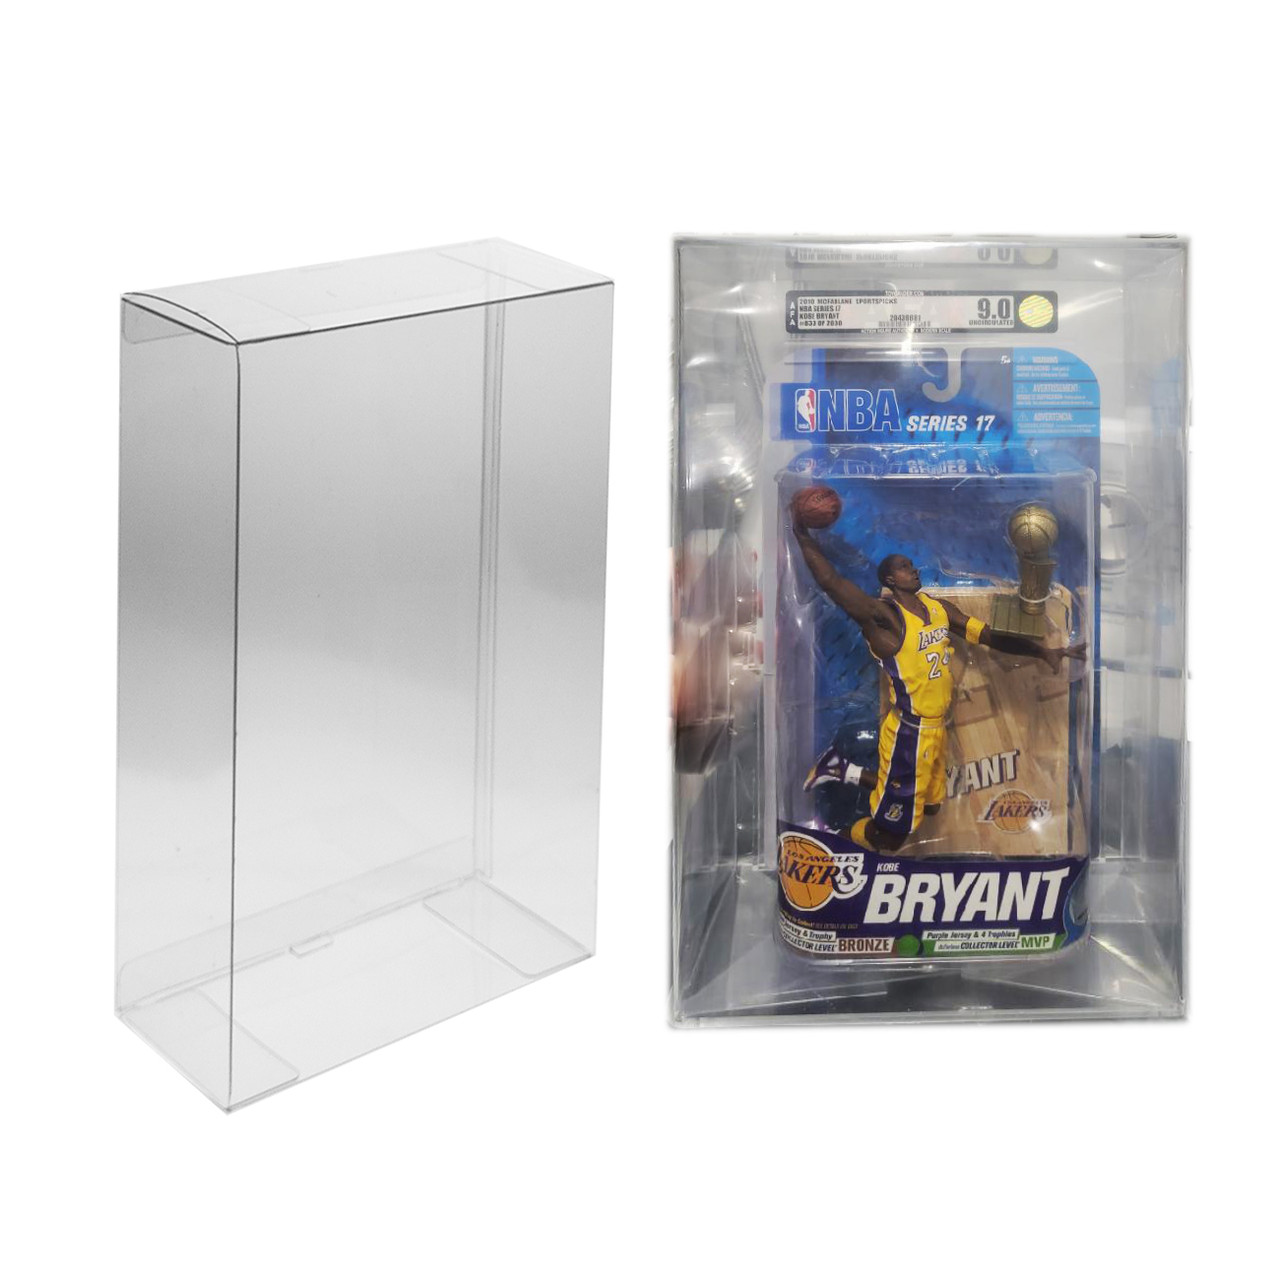 Katana Collectibles Protector For McFarlane Kobe Bryant Figure in Case